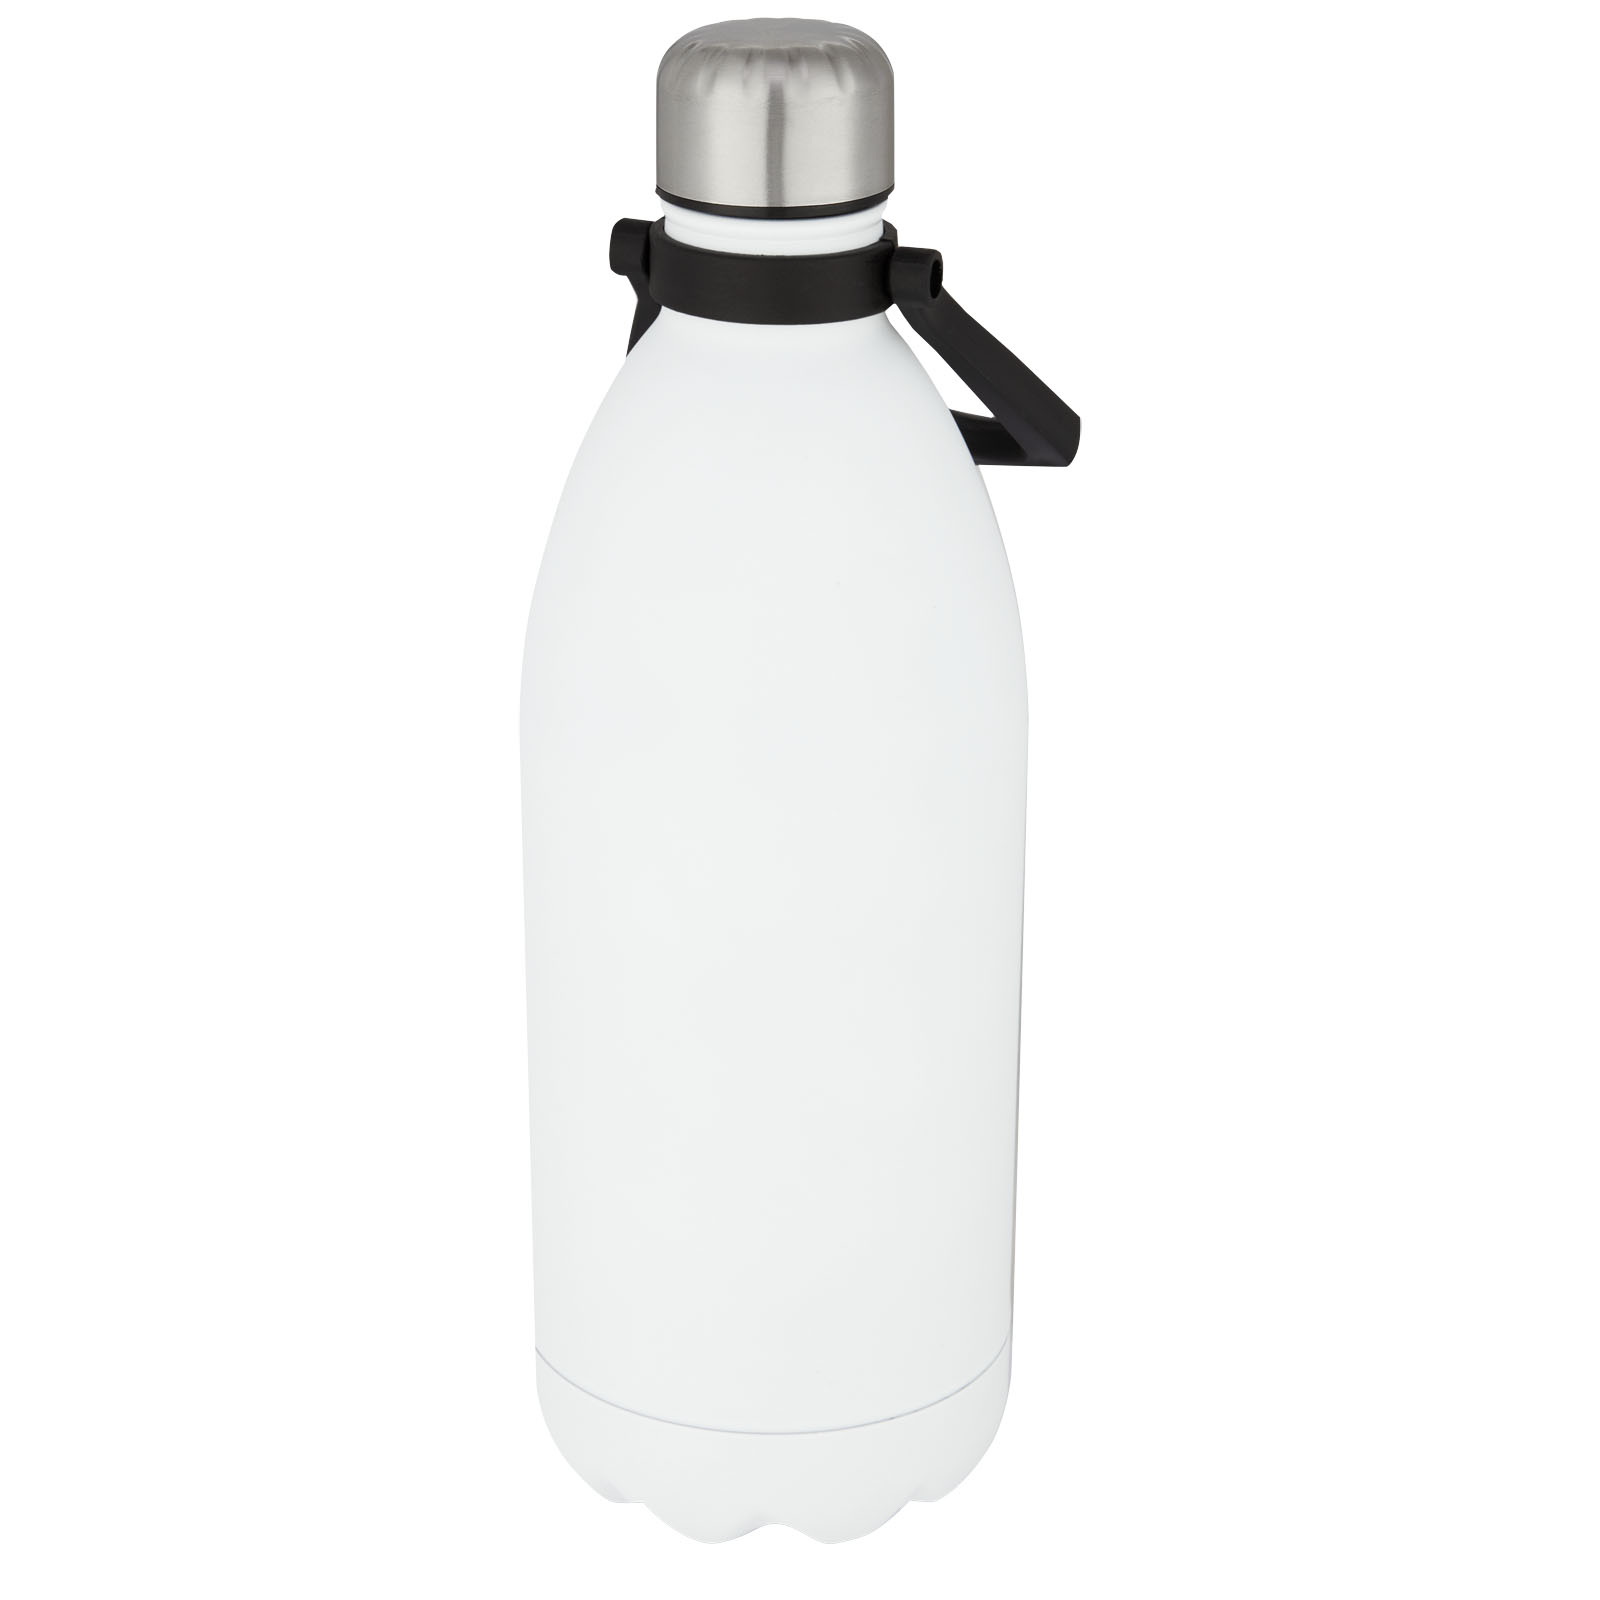 Advertising Insulated mugs - Cove 1.5 L vacuum insulated stainless steel bottle